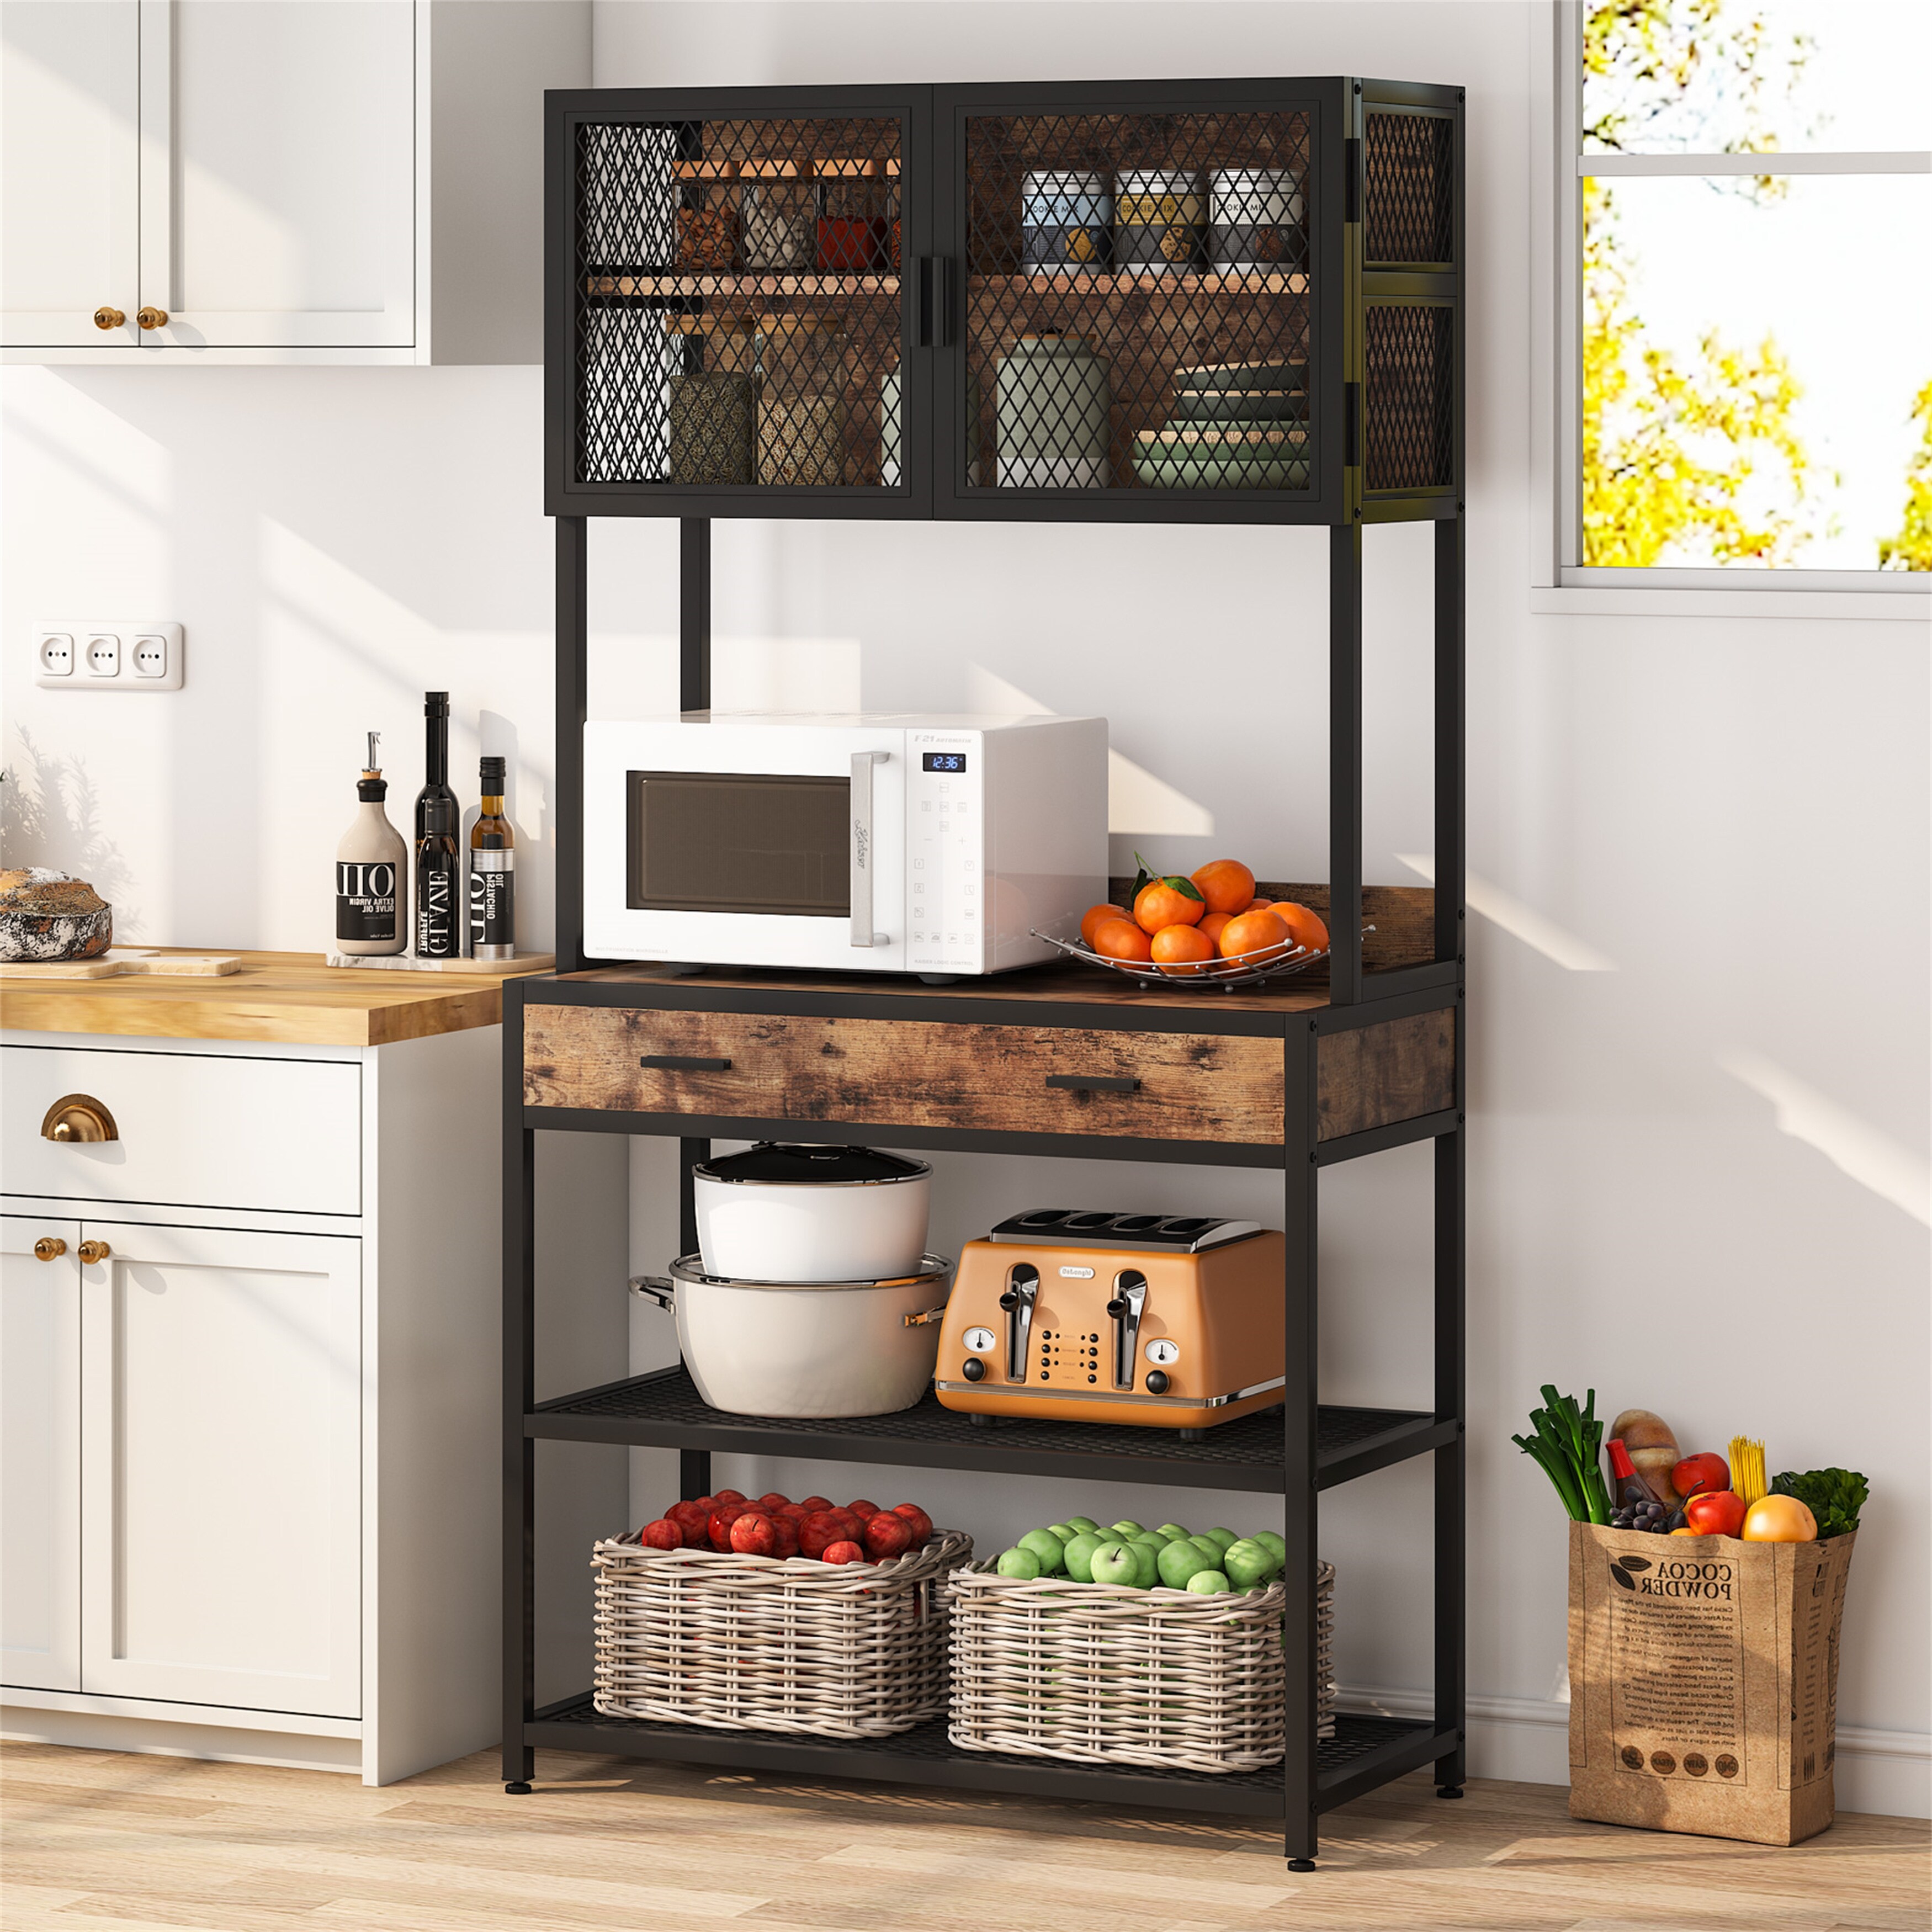 https://ak1.ostkcdn.com/images/products/is/images/direct/ccb9844675bc574a4046ecc0b12fdc61a16a0beb/Kitchen-Bakers-Rack-with-2-Drawers%2C-Kitchen-Storage-Shelf-Organizer-Rack%2C-Utility-Storage-Shelf-Microwave-Oven-Stand.jpg